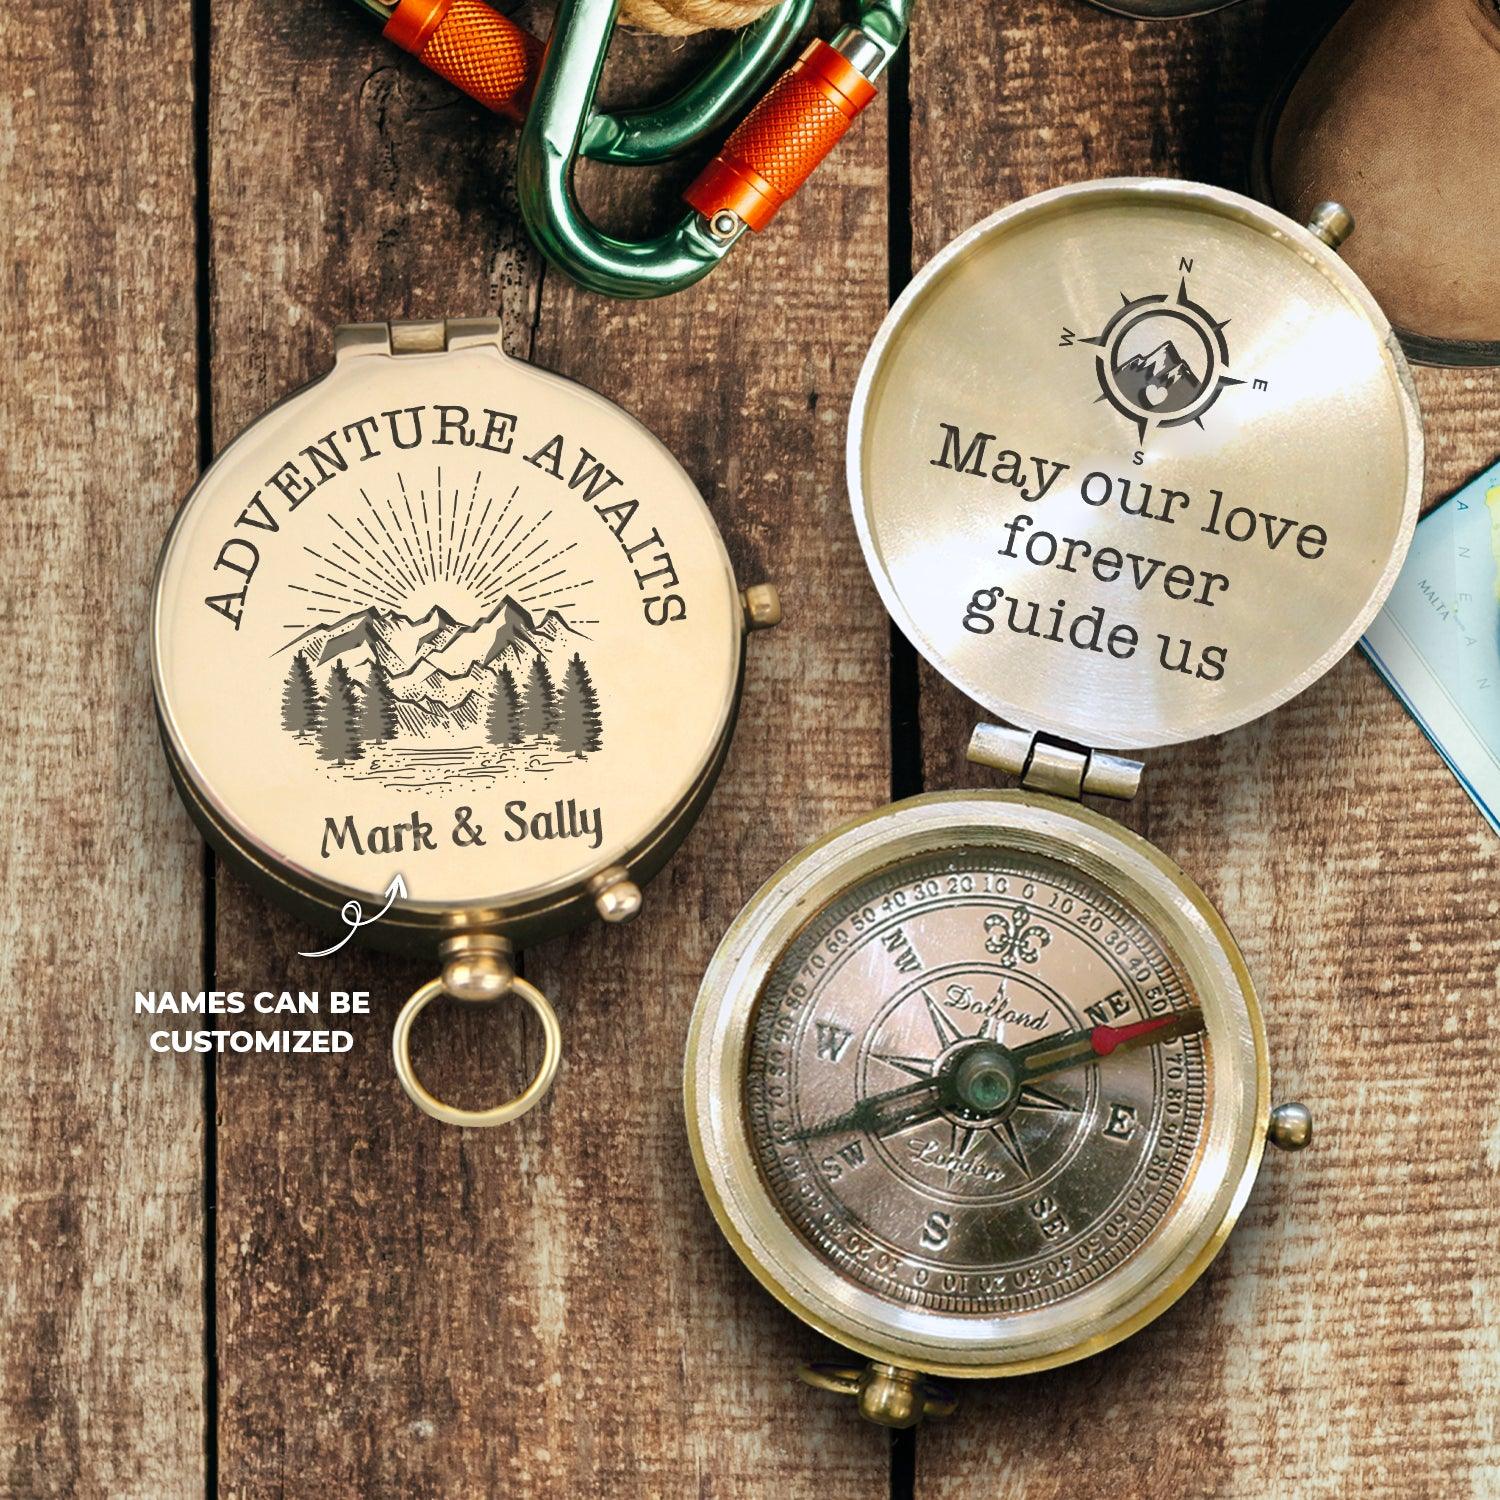 Personalised Engraved Compass - Travel - To My Future Husband - Future Wife - Adventure Awaits - Augpb24001 - Gifts Holder